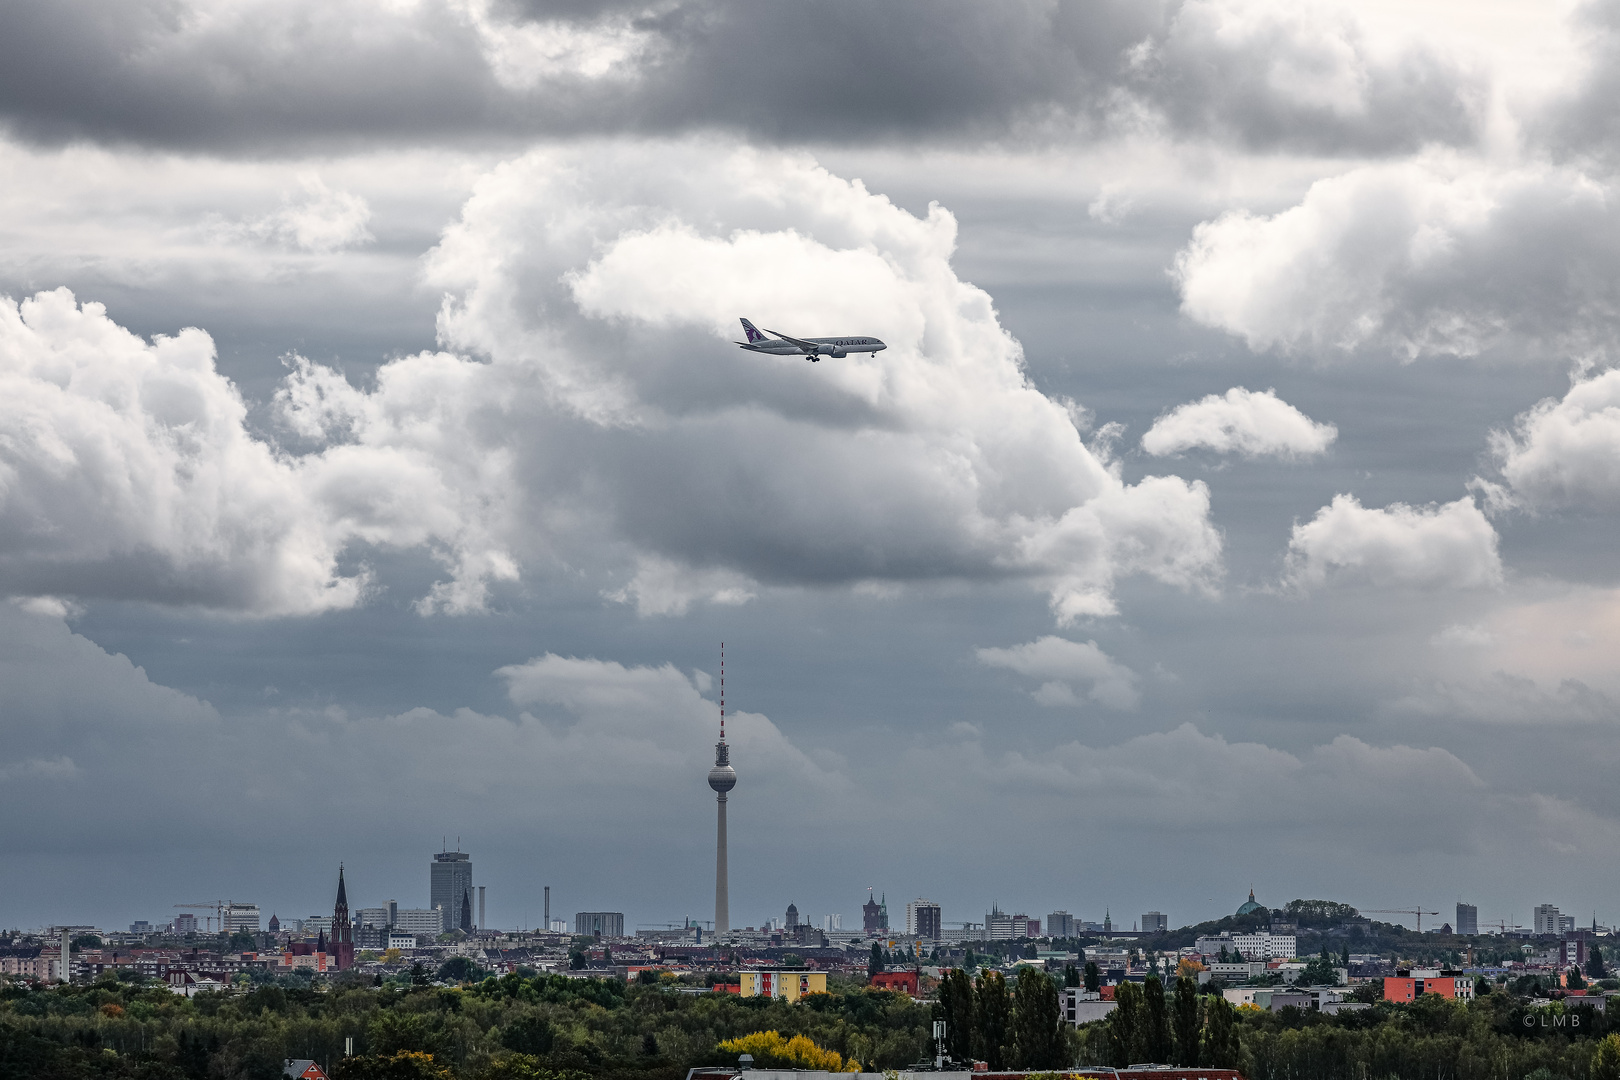 Serial number 150: The landing approach over the city